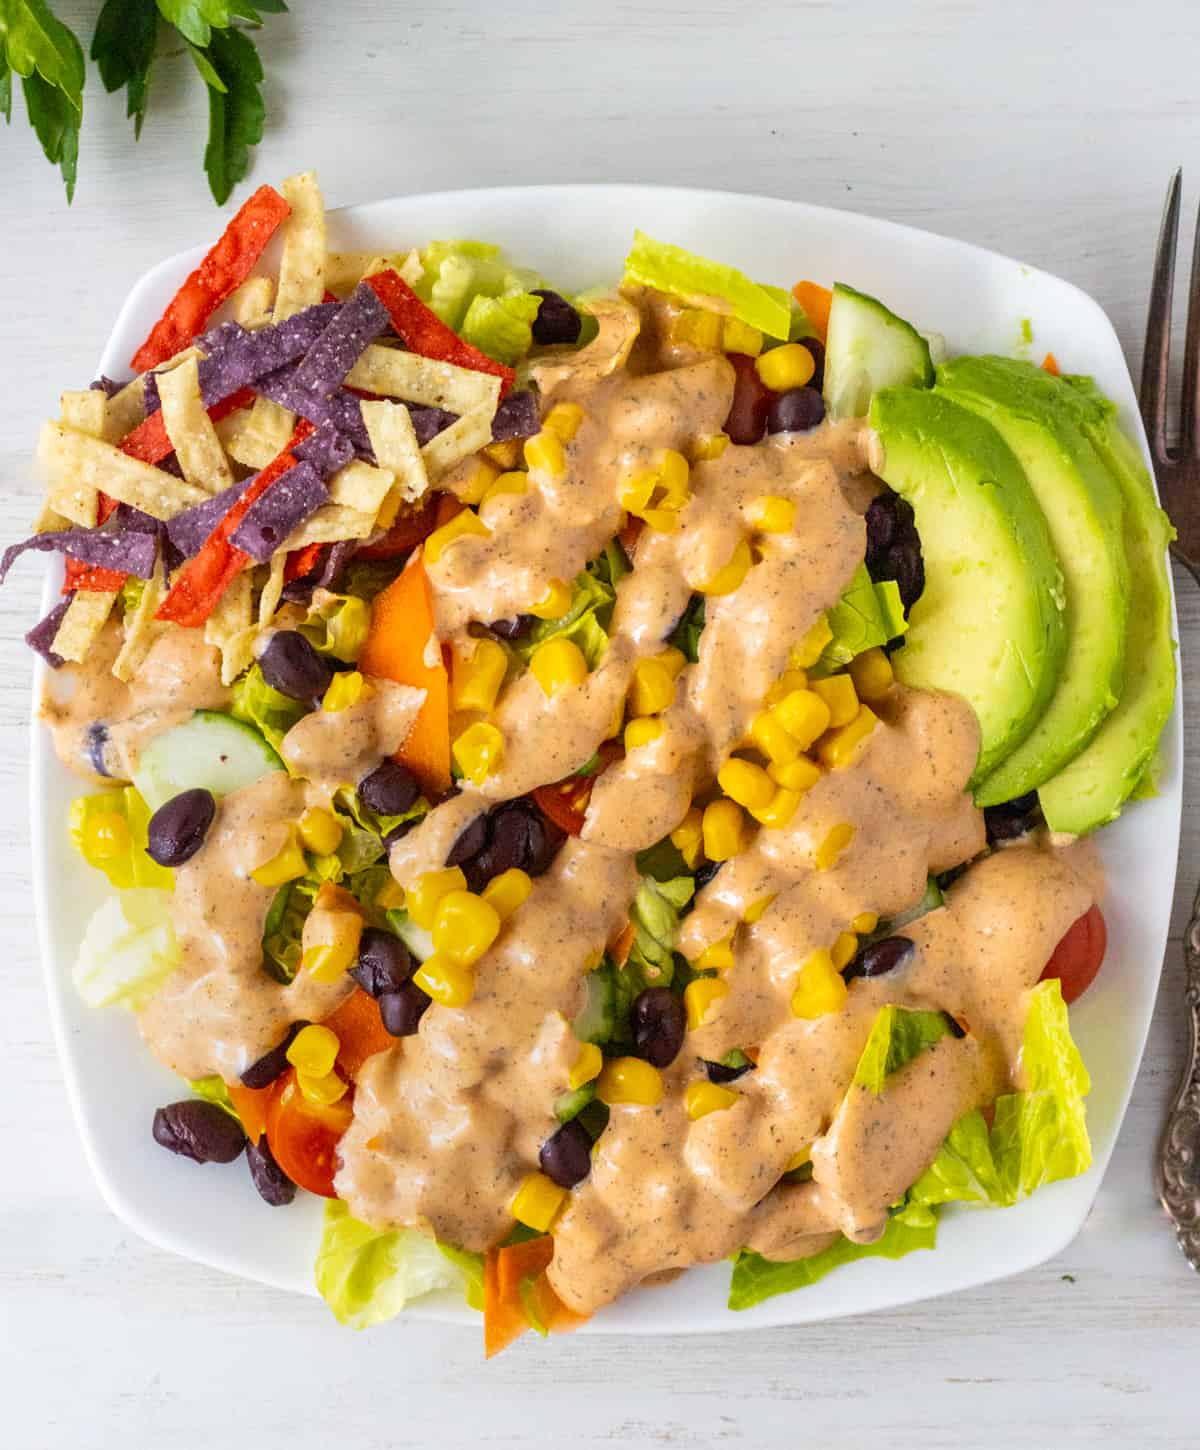 Tex mex salad drizzled with bbq ranch dressing.